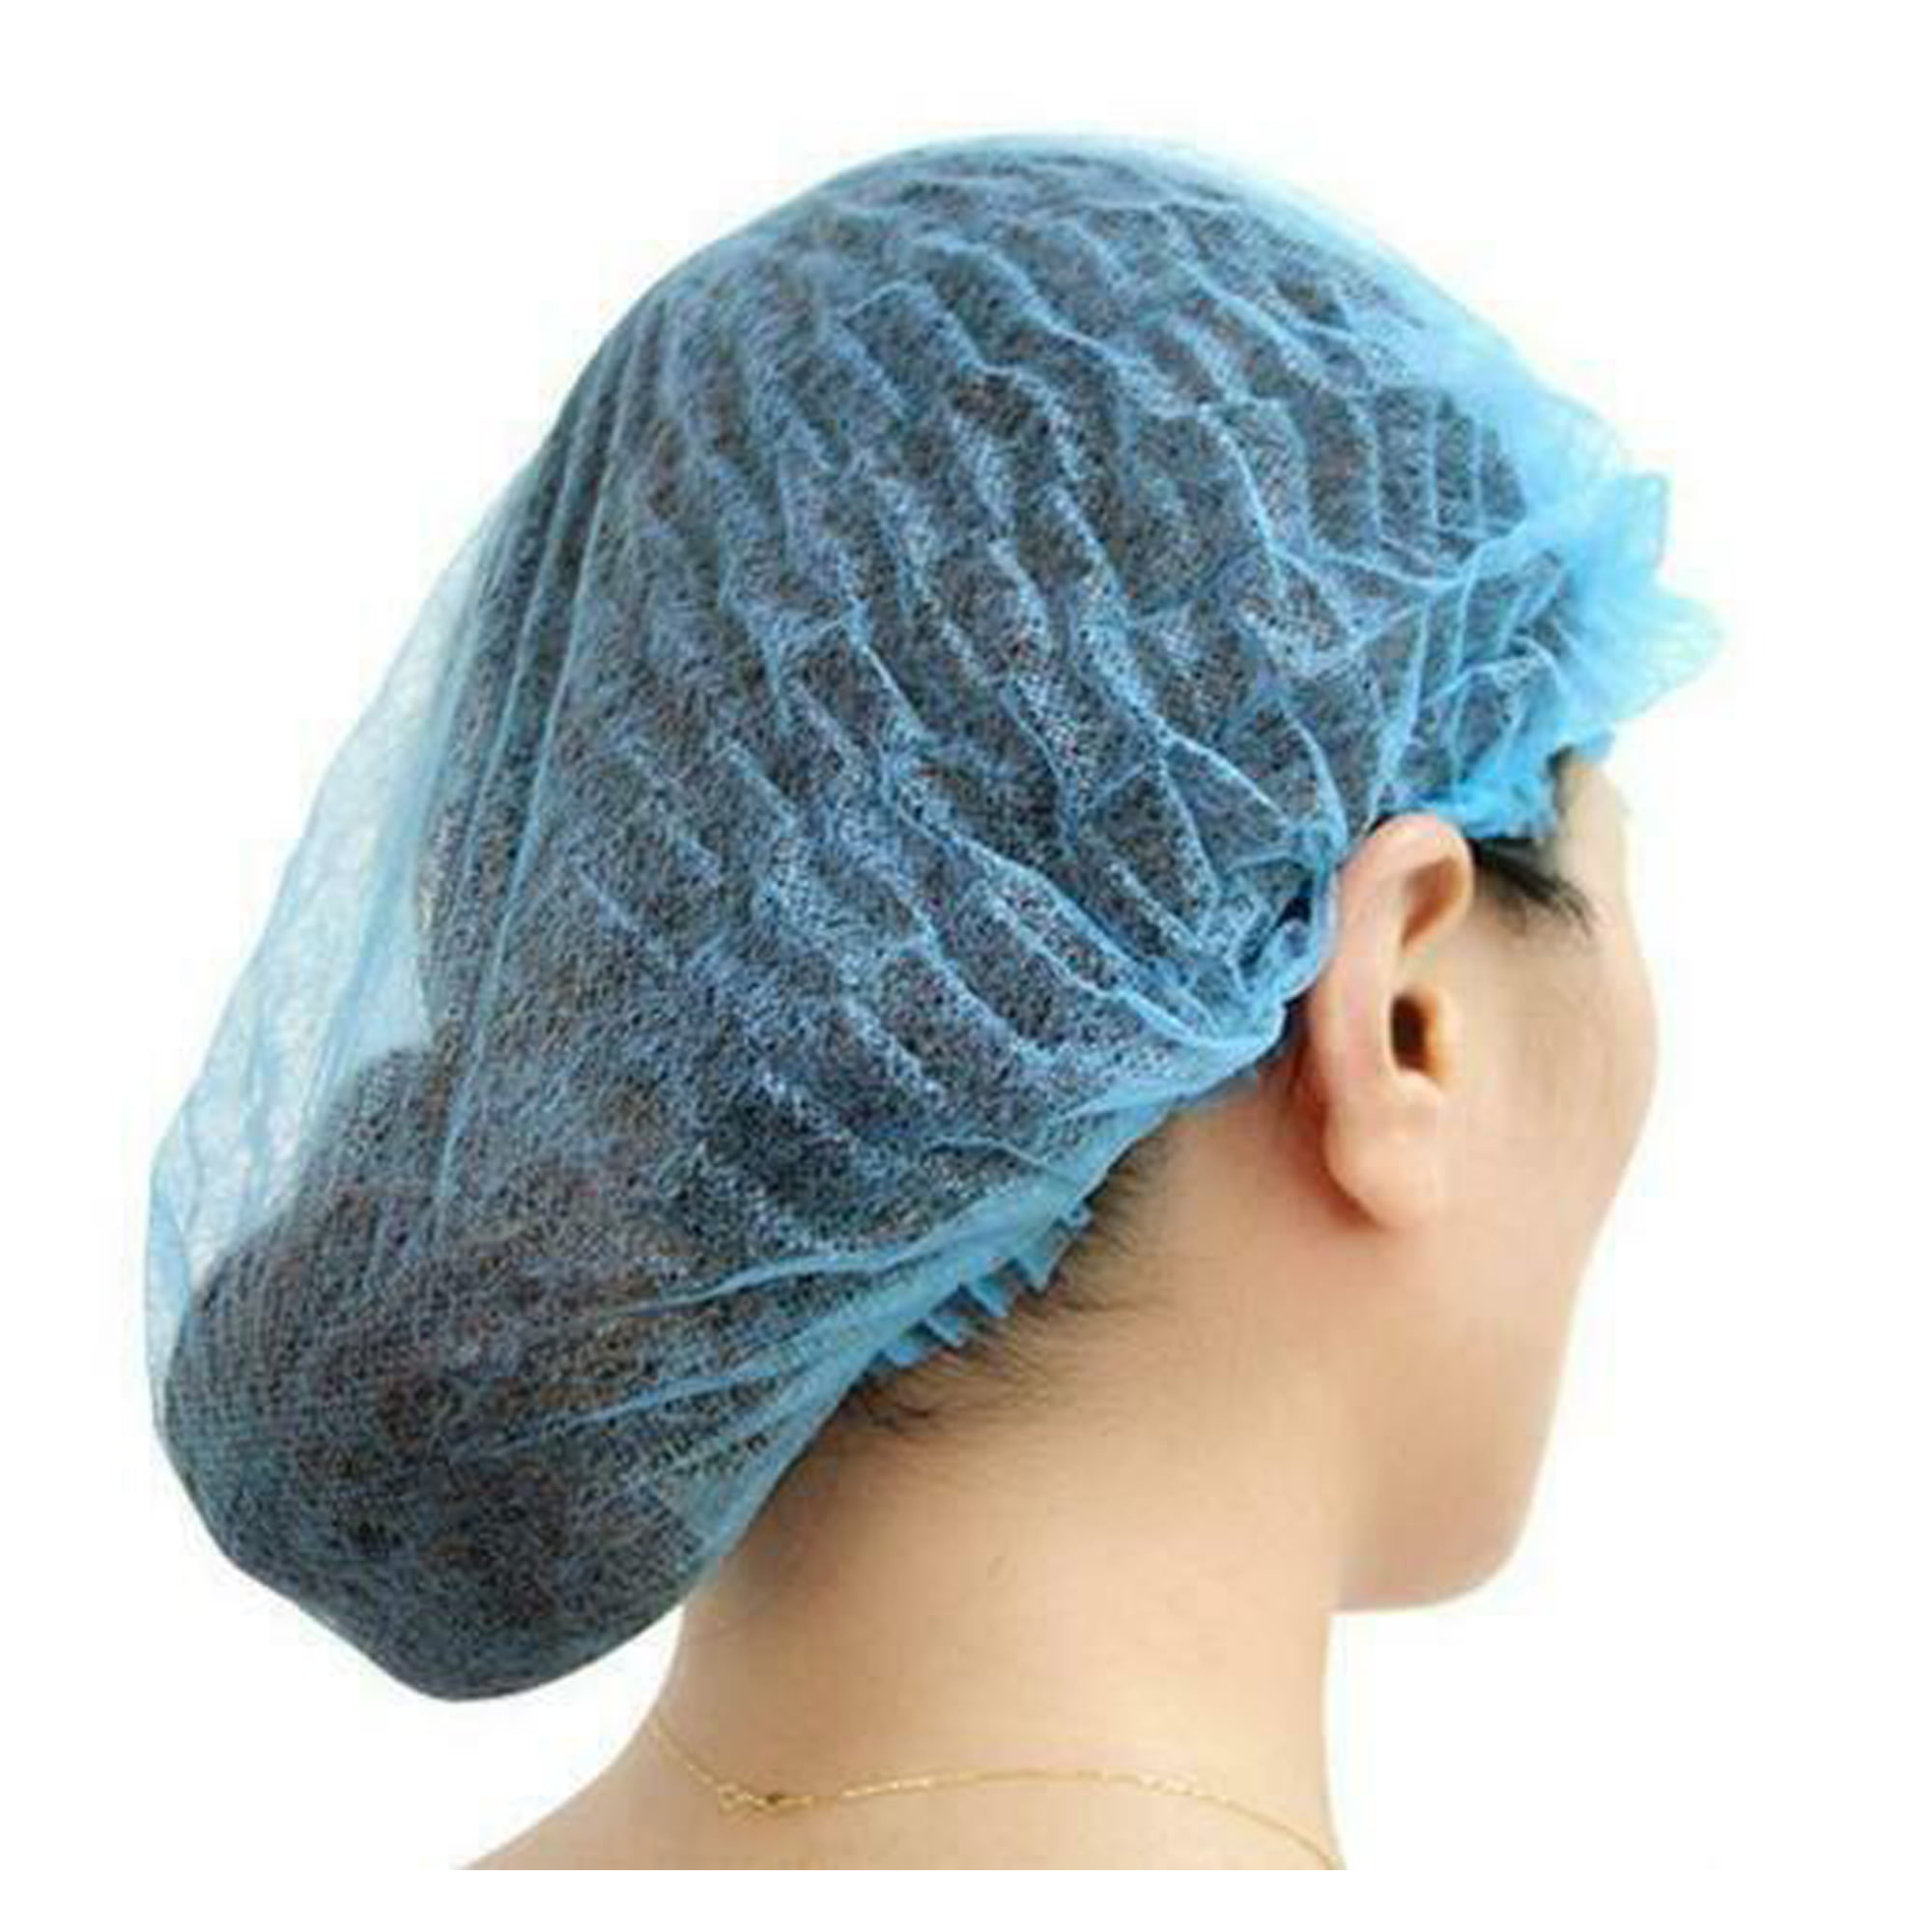 for catering outlets restaurants 100 x Blue Mesh Hair nets one size fits all 